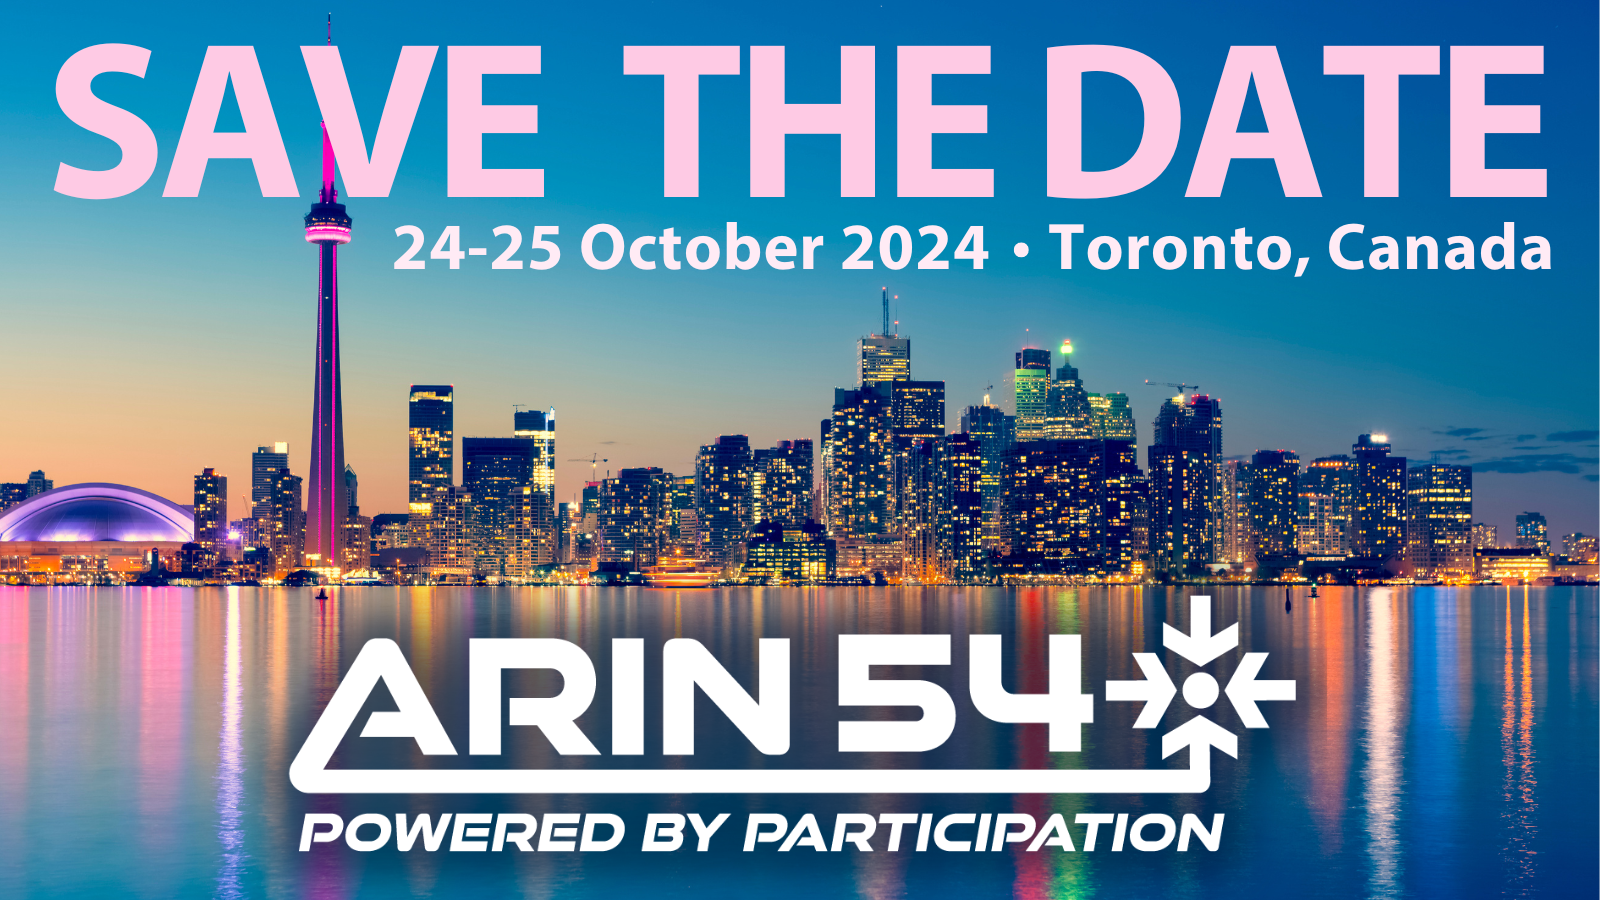 Save the Date for ARIN 54 on 24-25 October in Toronto, Canada